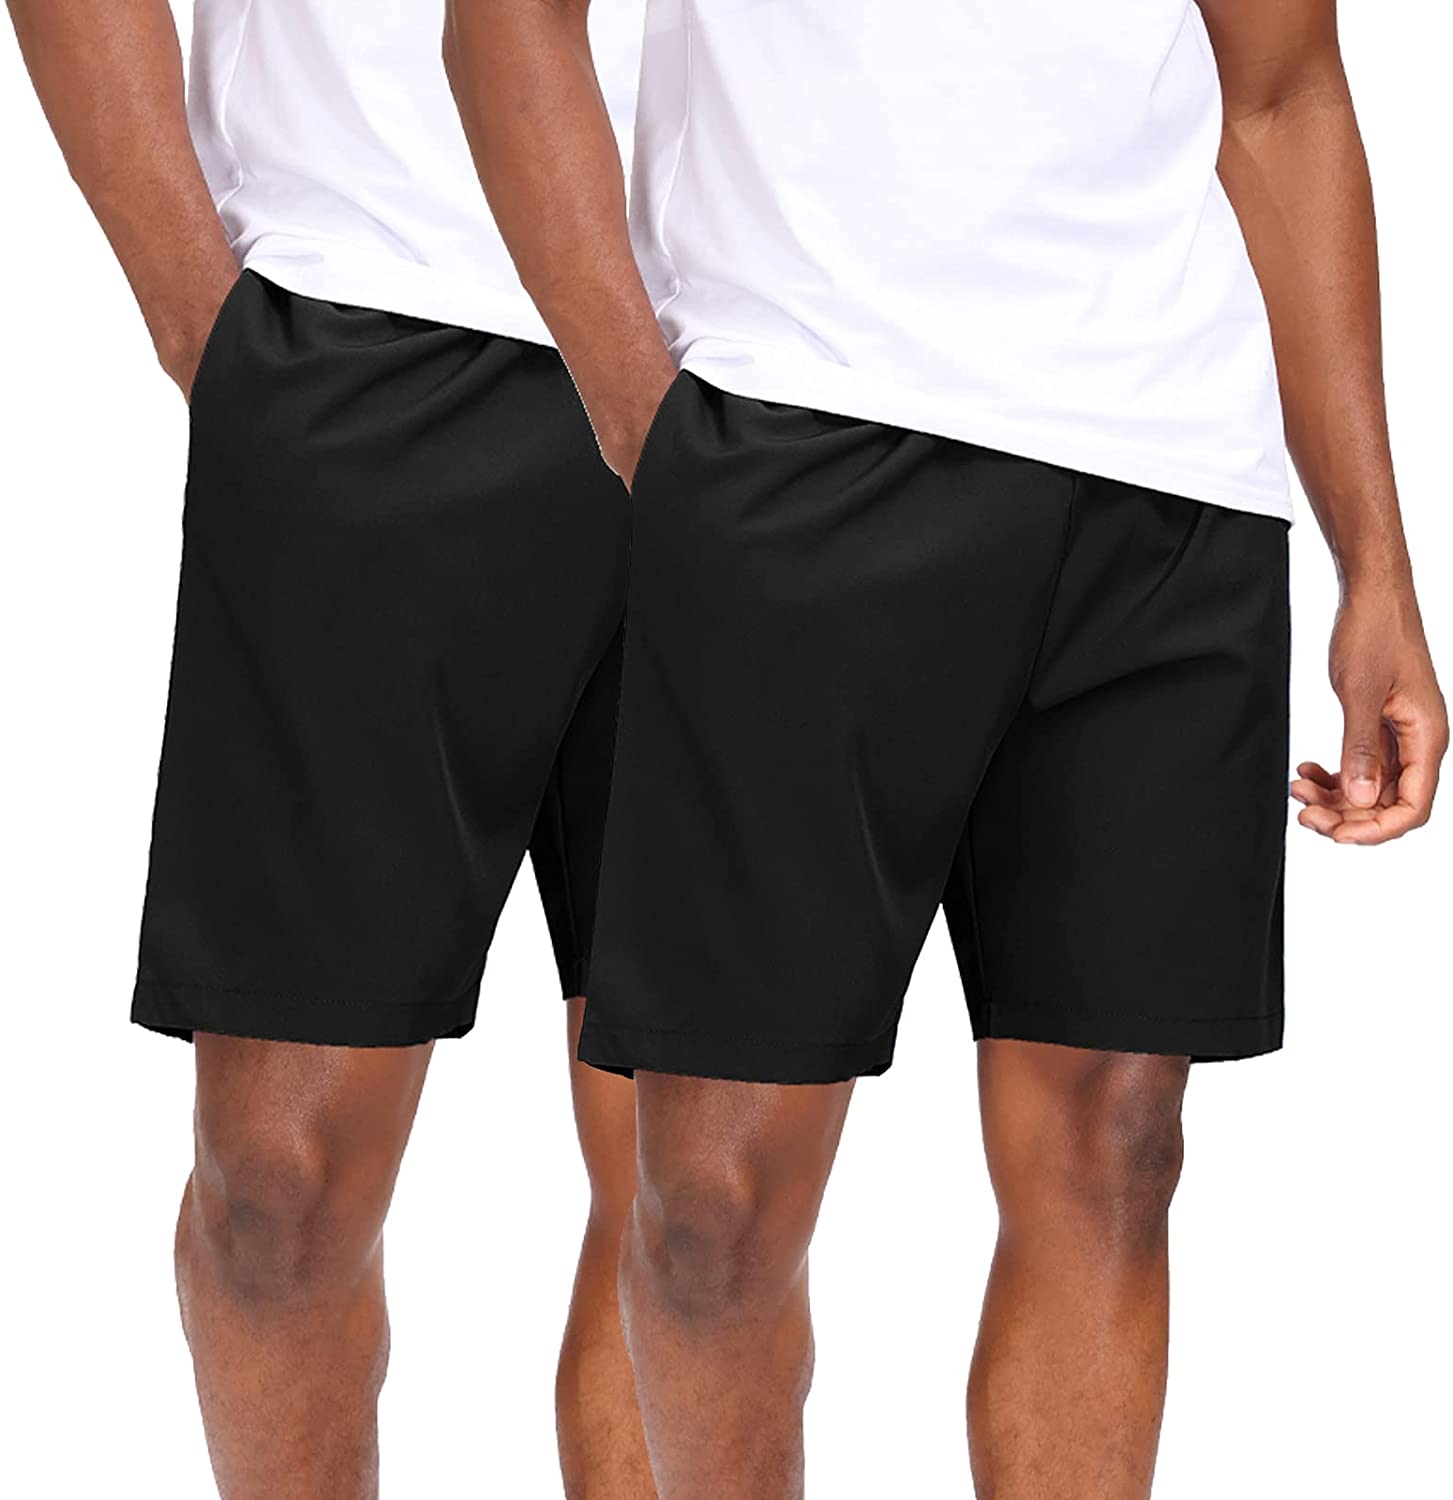 HMIYA Men's Sports Shorts Quick Dry with Zip Pockets for Workout Running Training